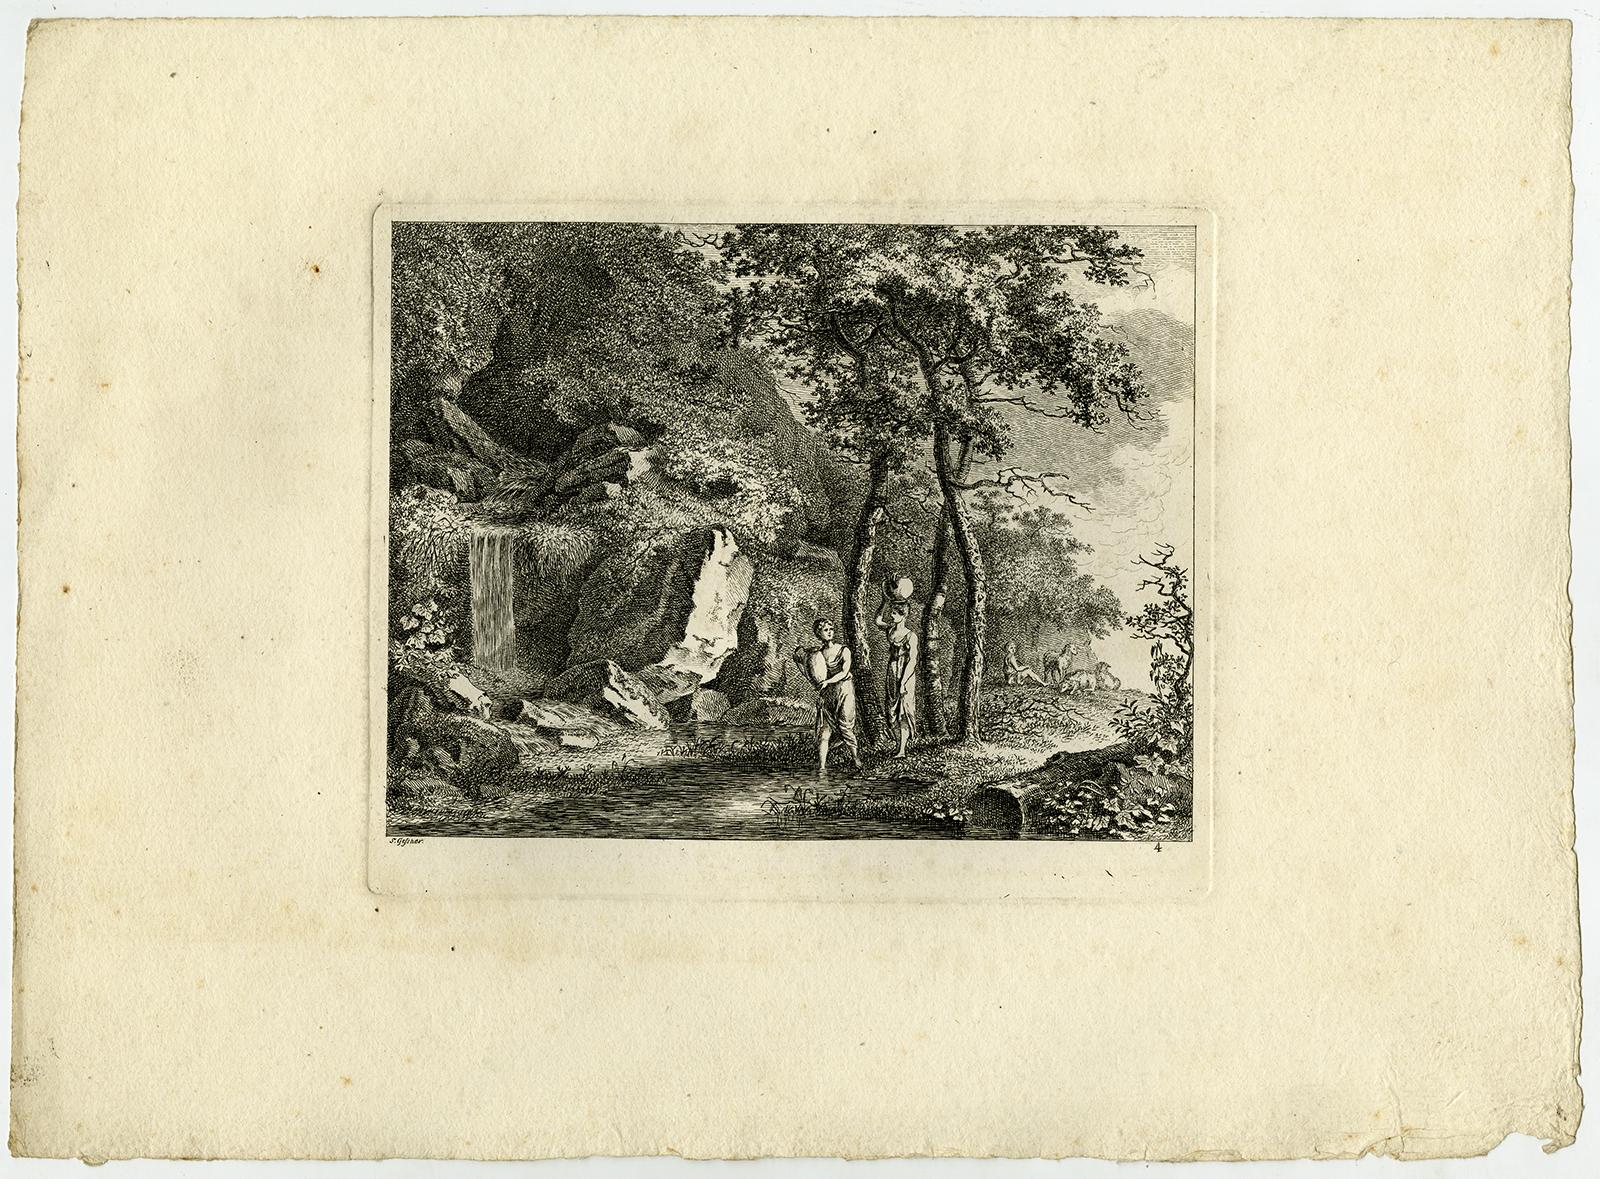 Subject:  Antique Master Print, untitled.  - Two women with pitcher near a spring and a child with sheep.

Description:  From a set with landscapes in the 'antique' taste. . State: Second state of 2. Ref: L/E 14.

Artists and Engravers:  Made by